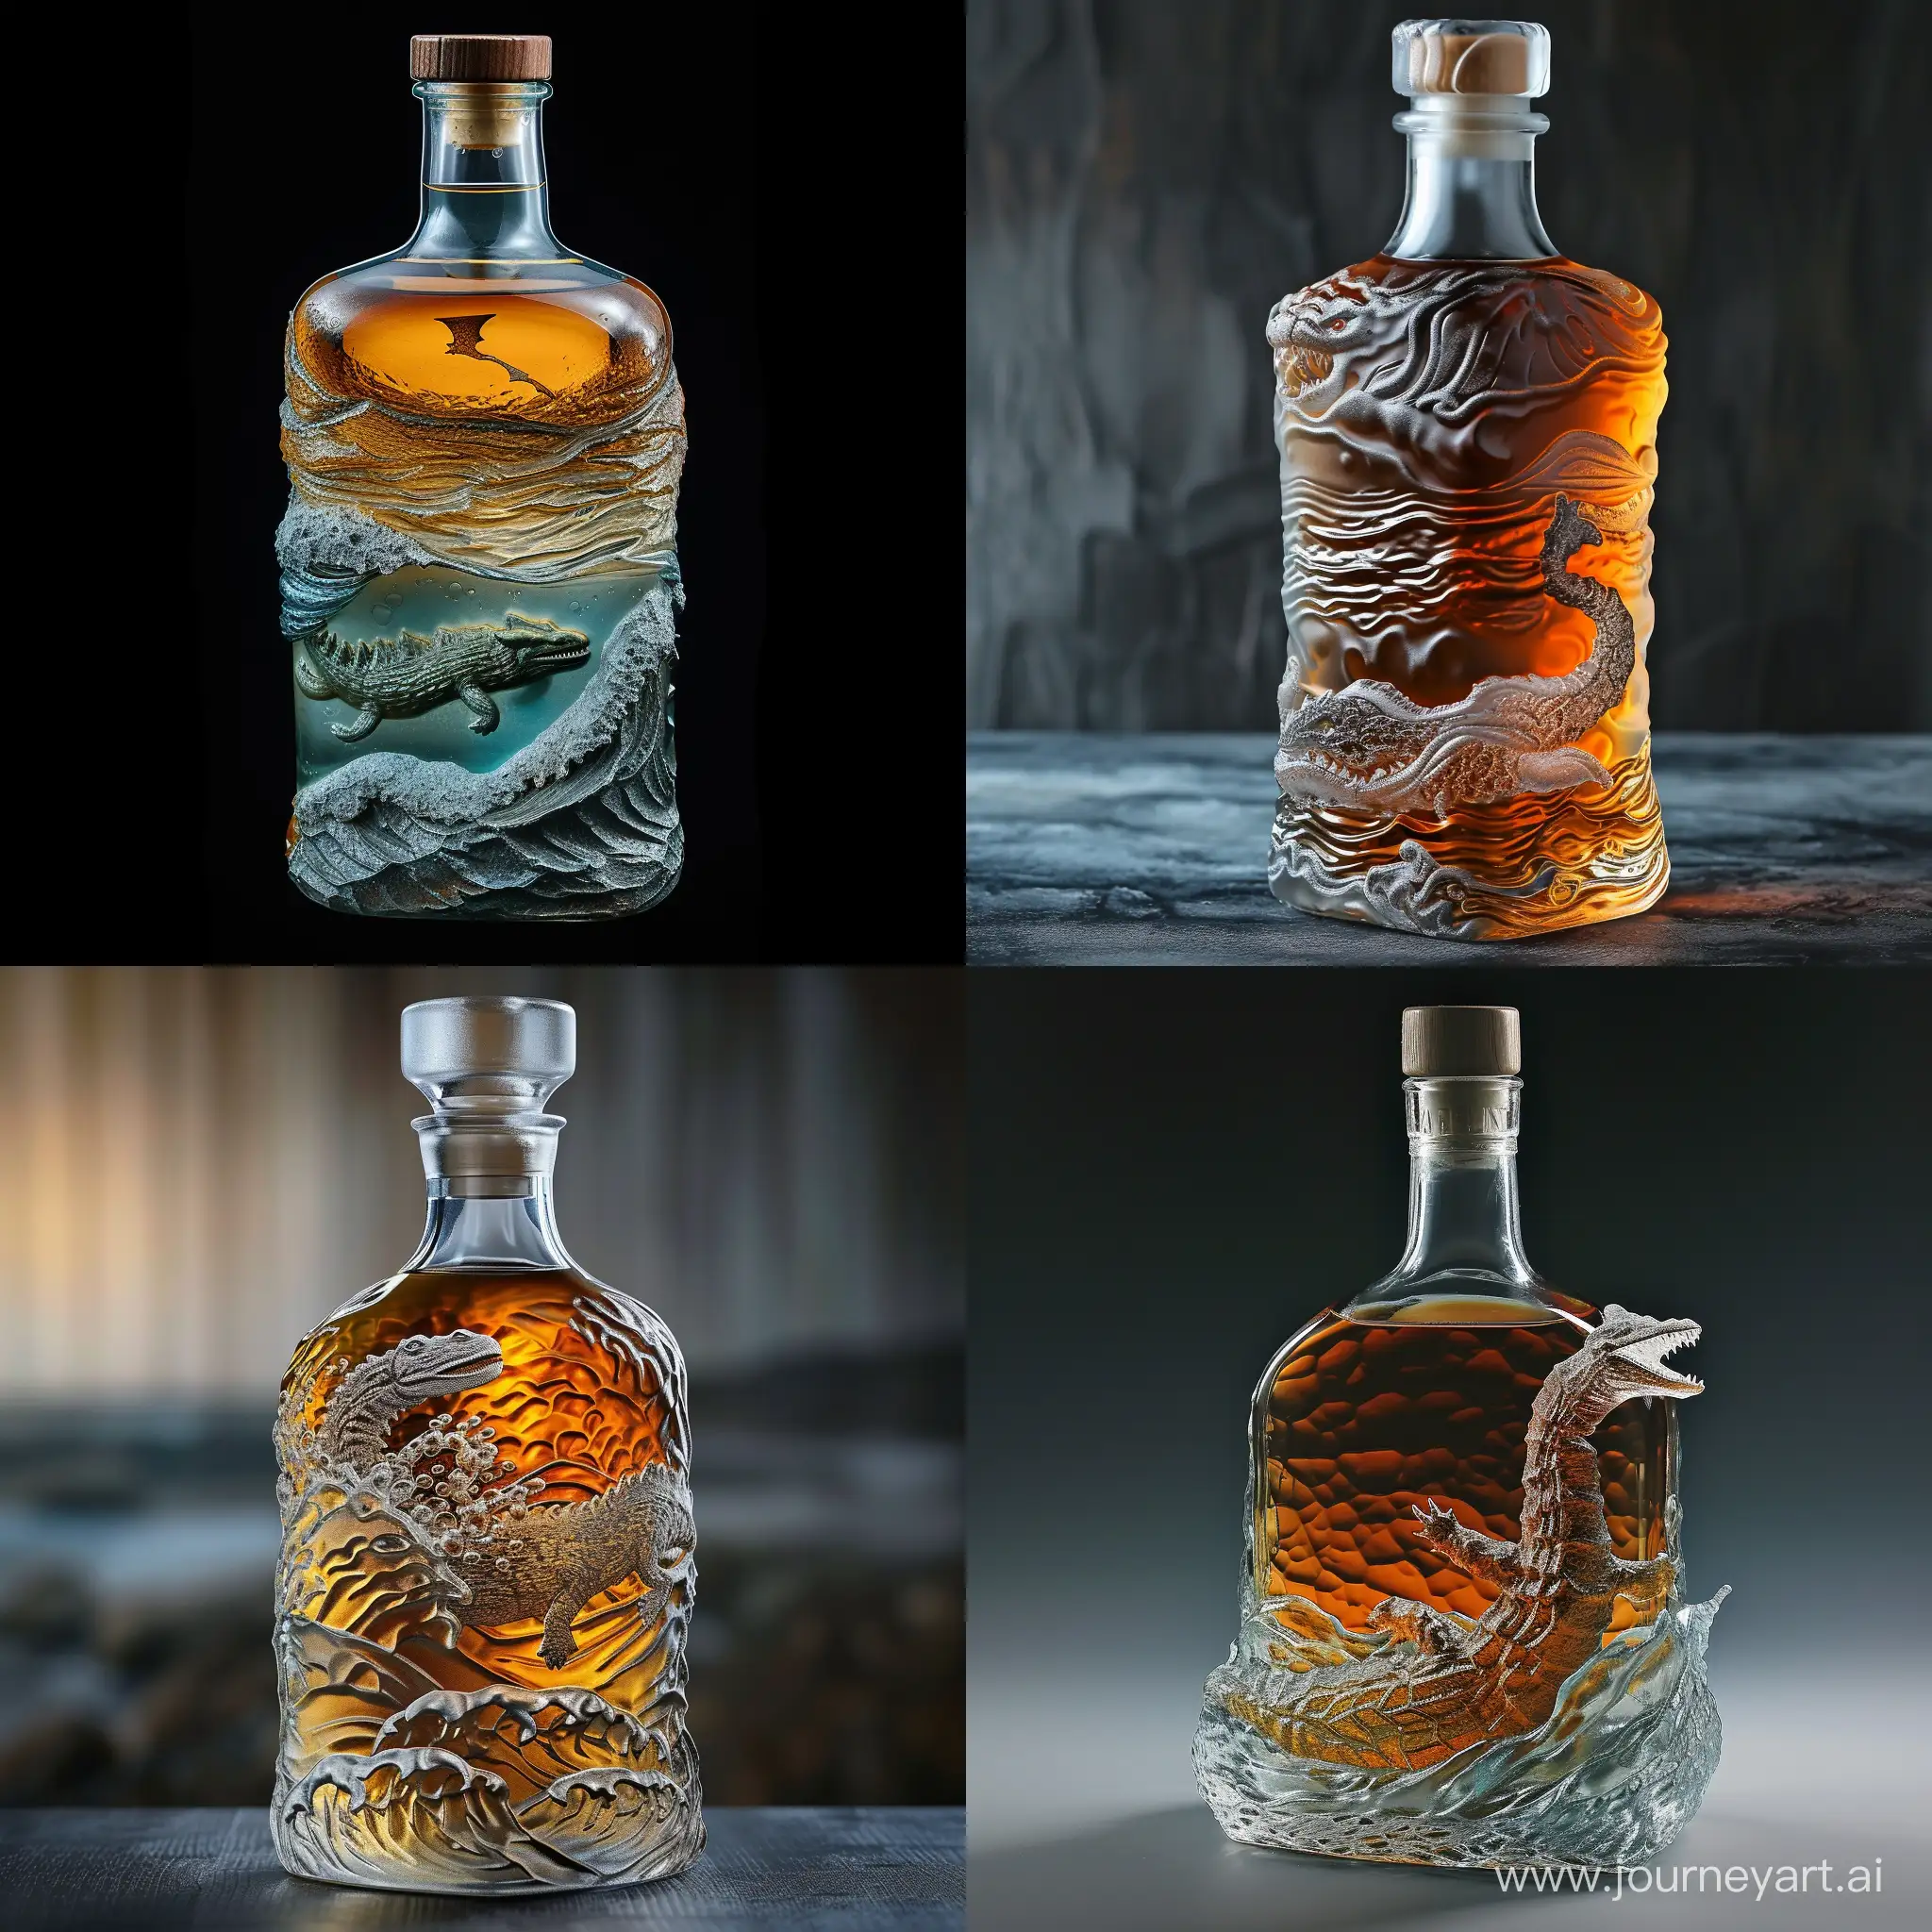 Whiskey-Bottle-with-Loch-Ness-Monster-in-Textured-Waves